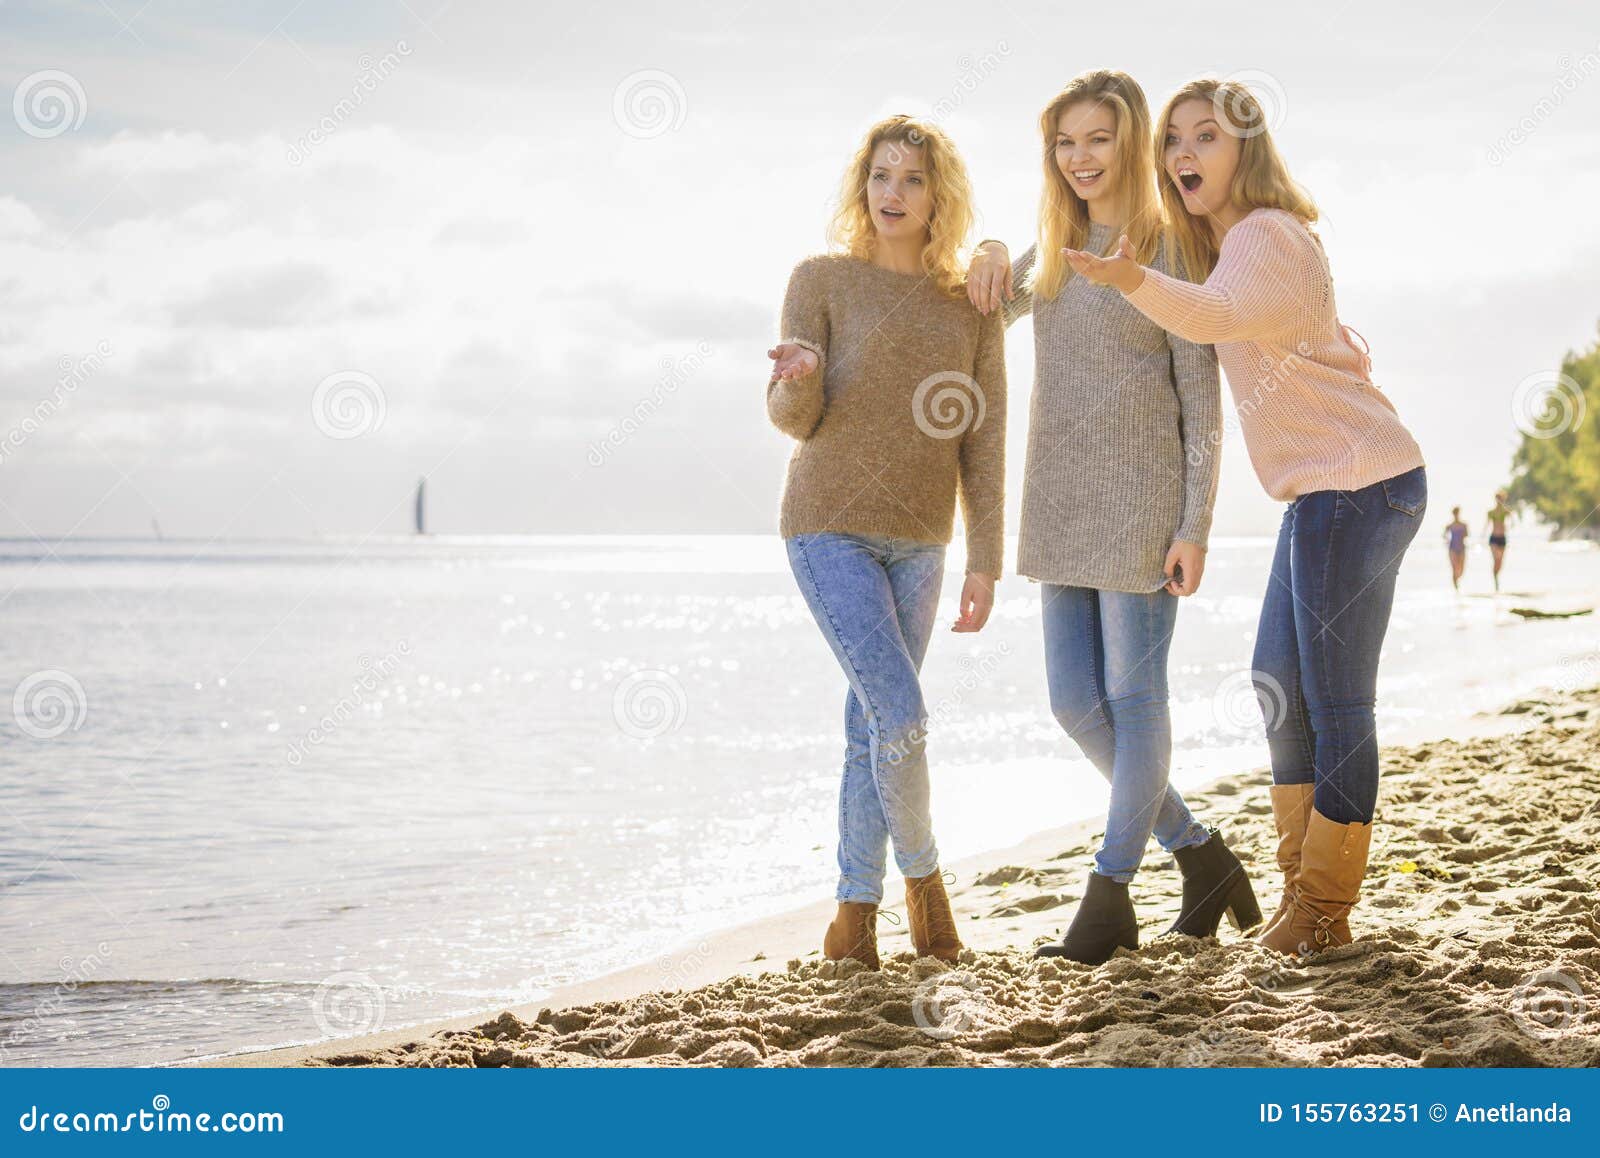 Three Fashionable Models Outdoor Stock Image - Image of students, beach ...